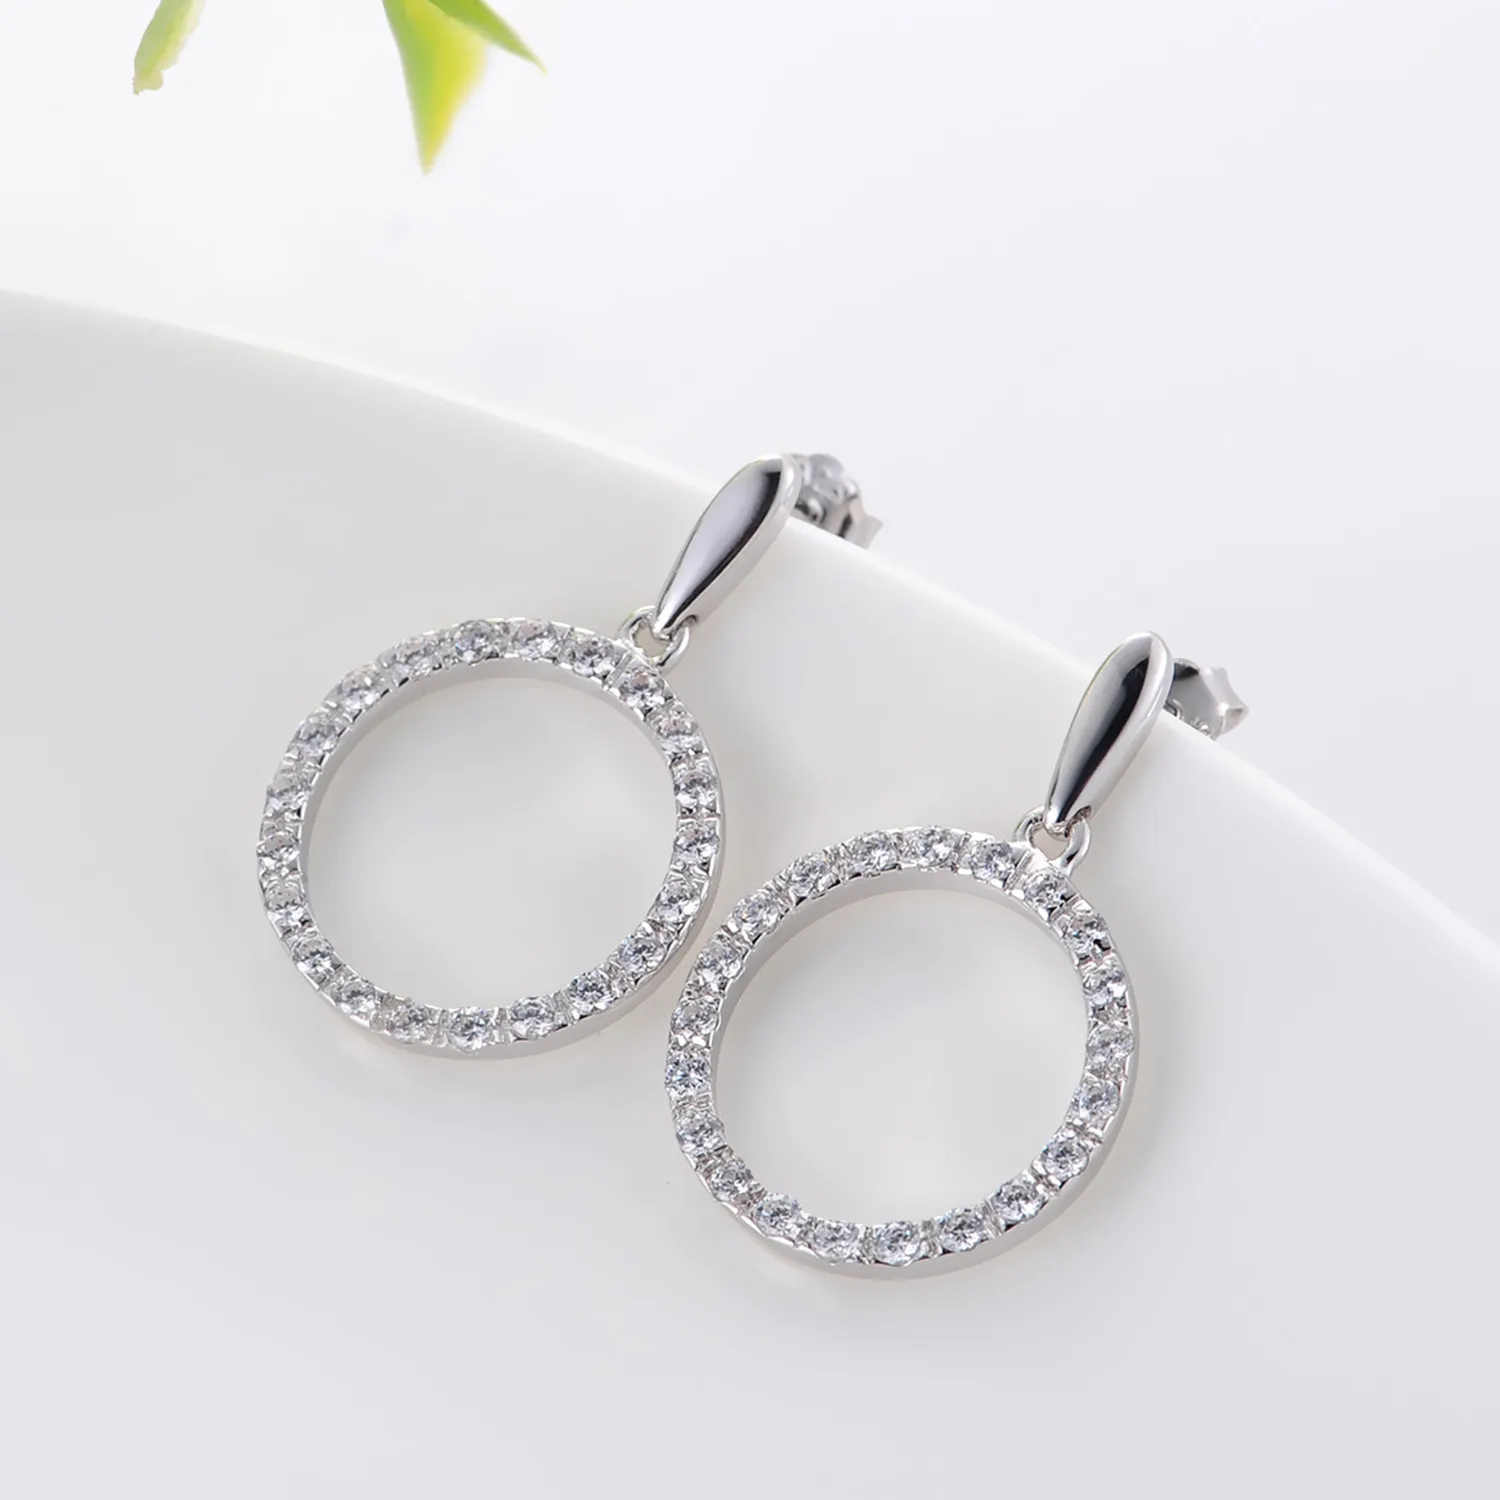 Rhodium Plated Minimalist Pendant Necklce Earrings 925 Sterling Silver High Quality Jewelry Set (图6)